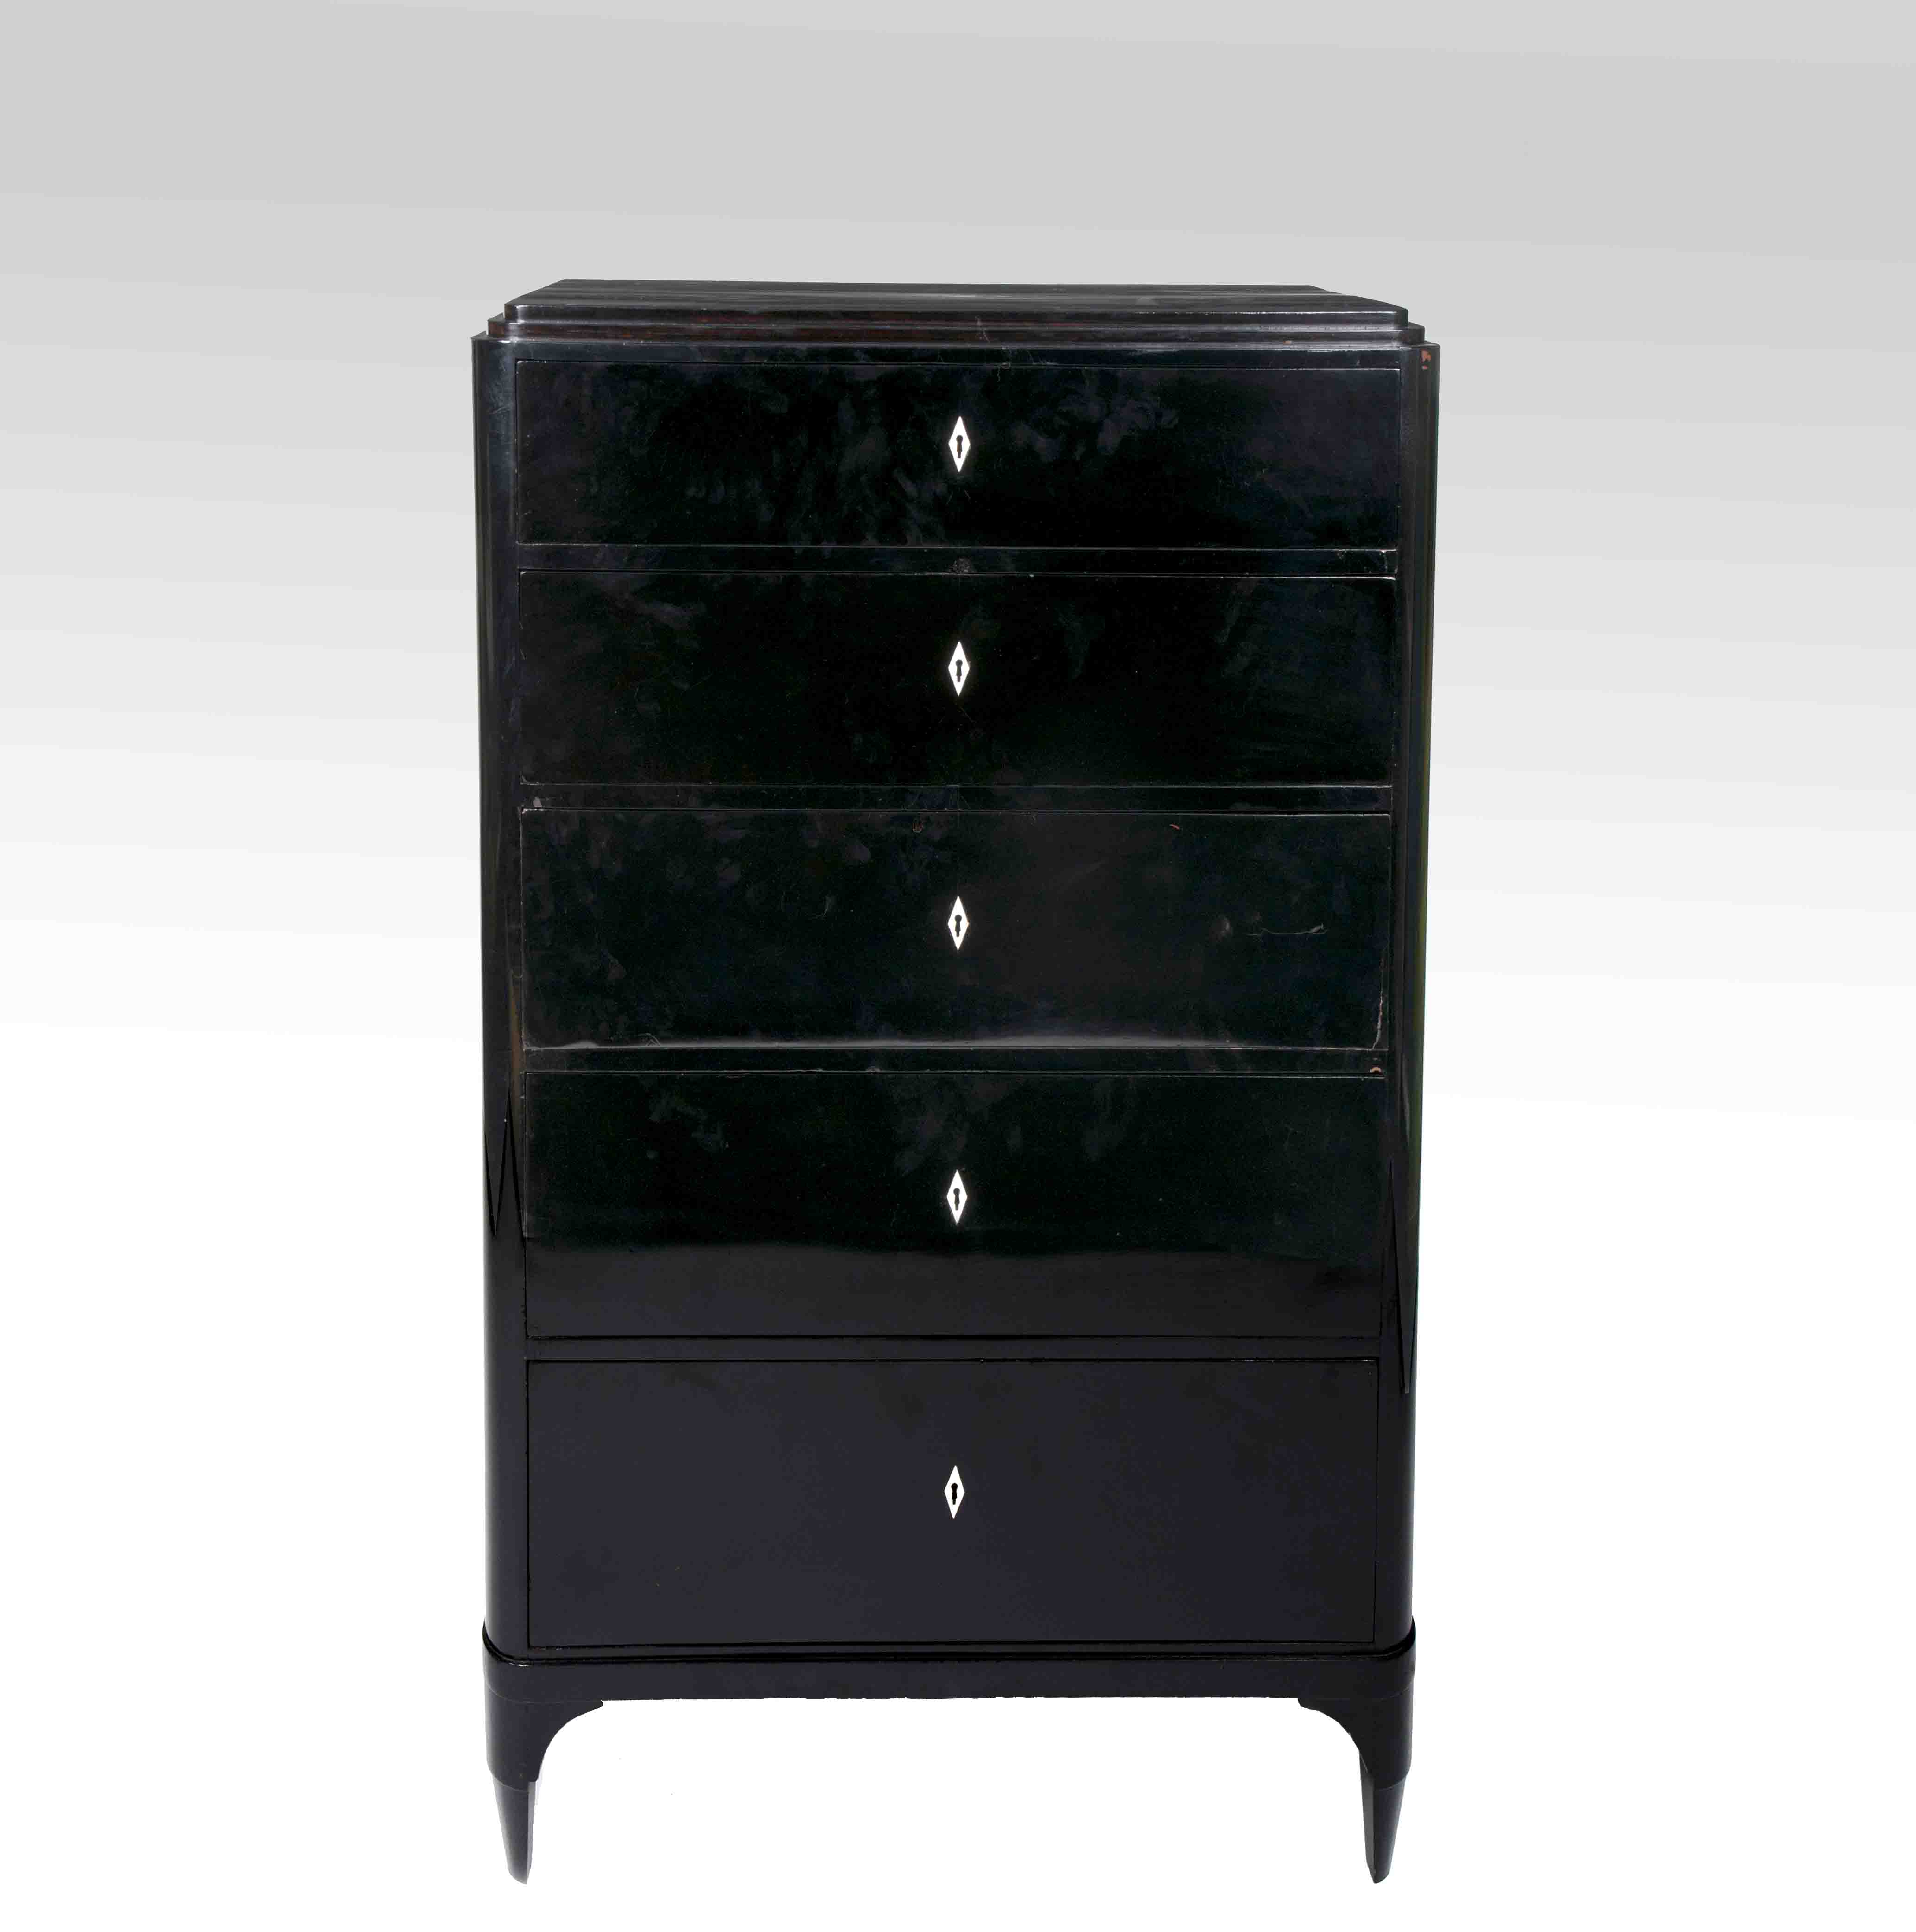 An ebonized chest of drawers